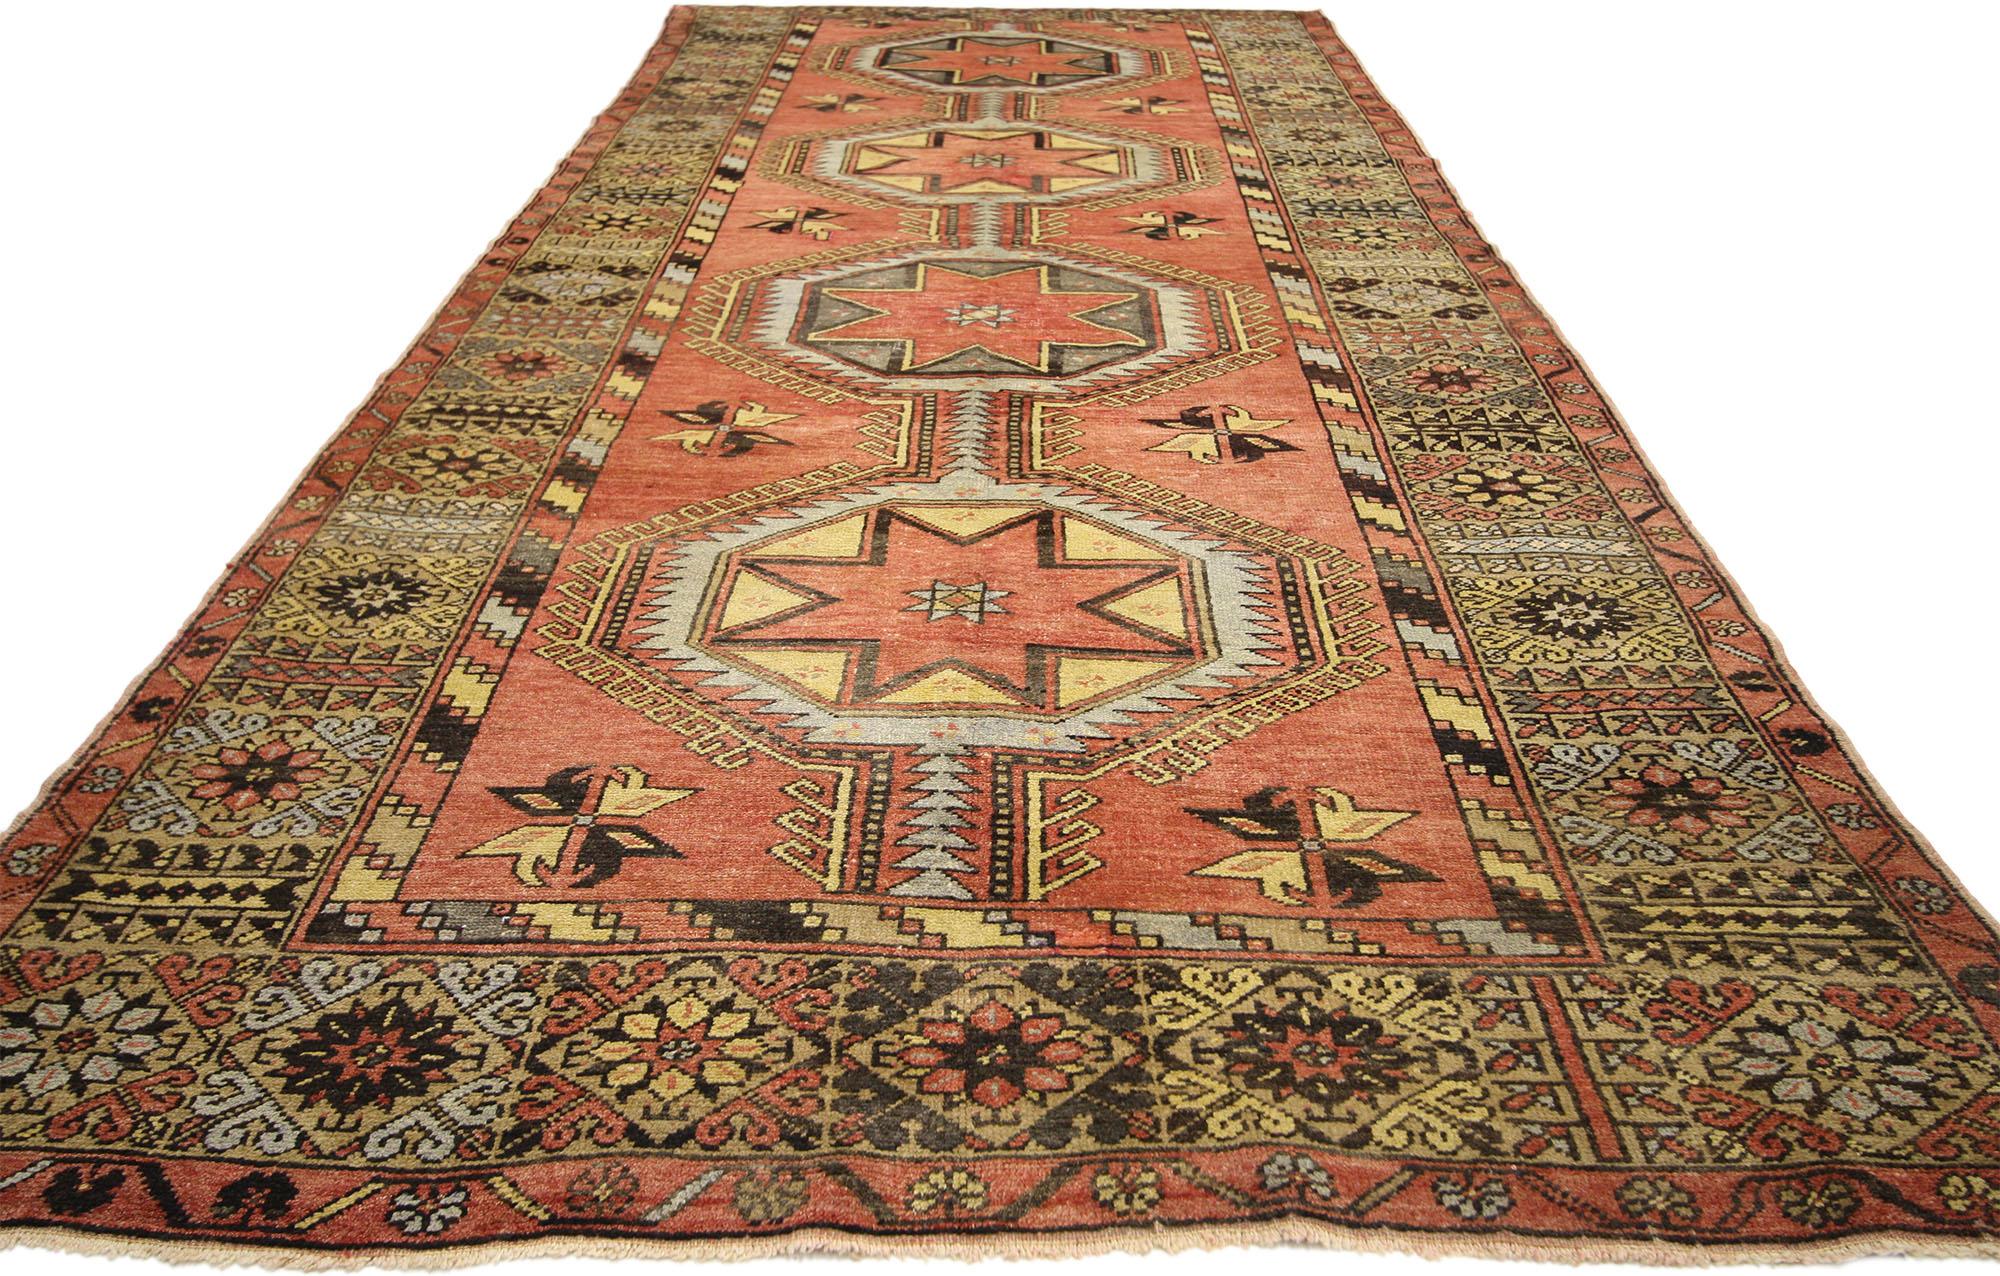 Vintage Turkish Oushak Carpet Runner with Modern Tribal Style In Good Condition For Sale In Dallas, TX